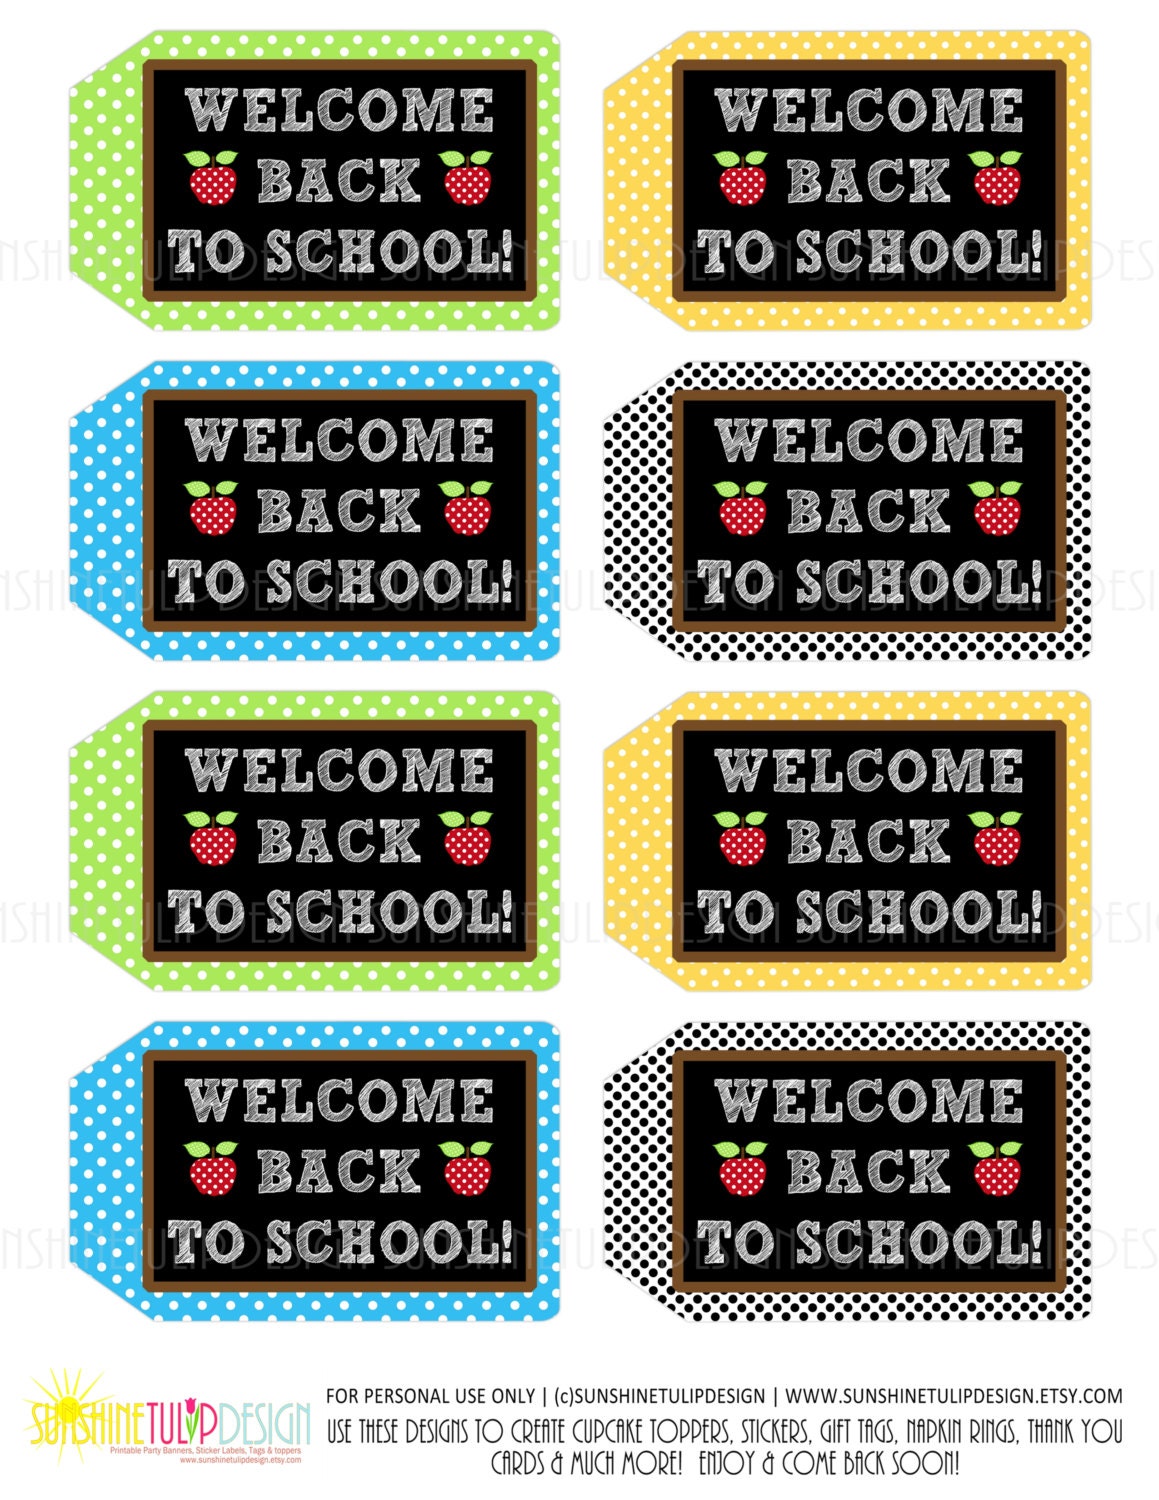 teacher-appreciation-welcome-back-to-school-gift-tags-by